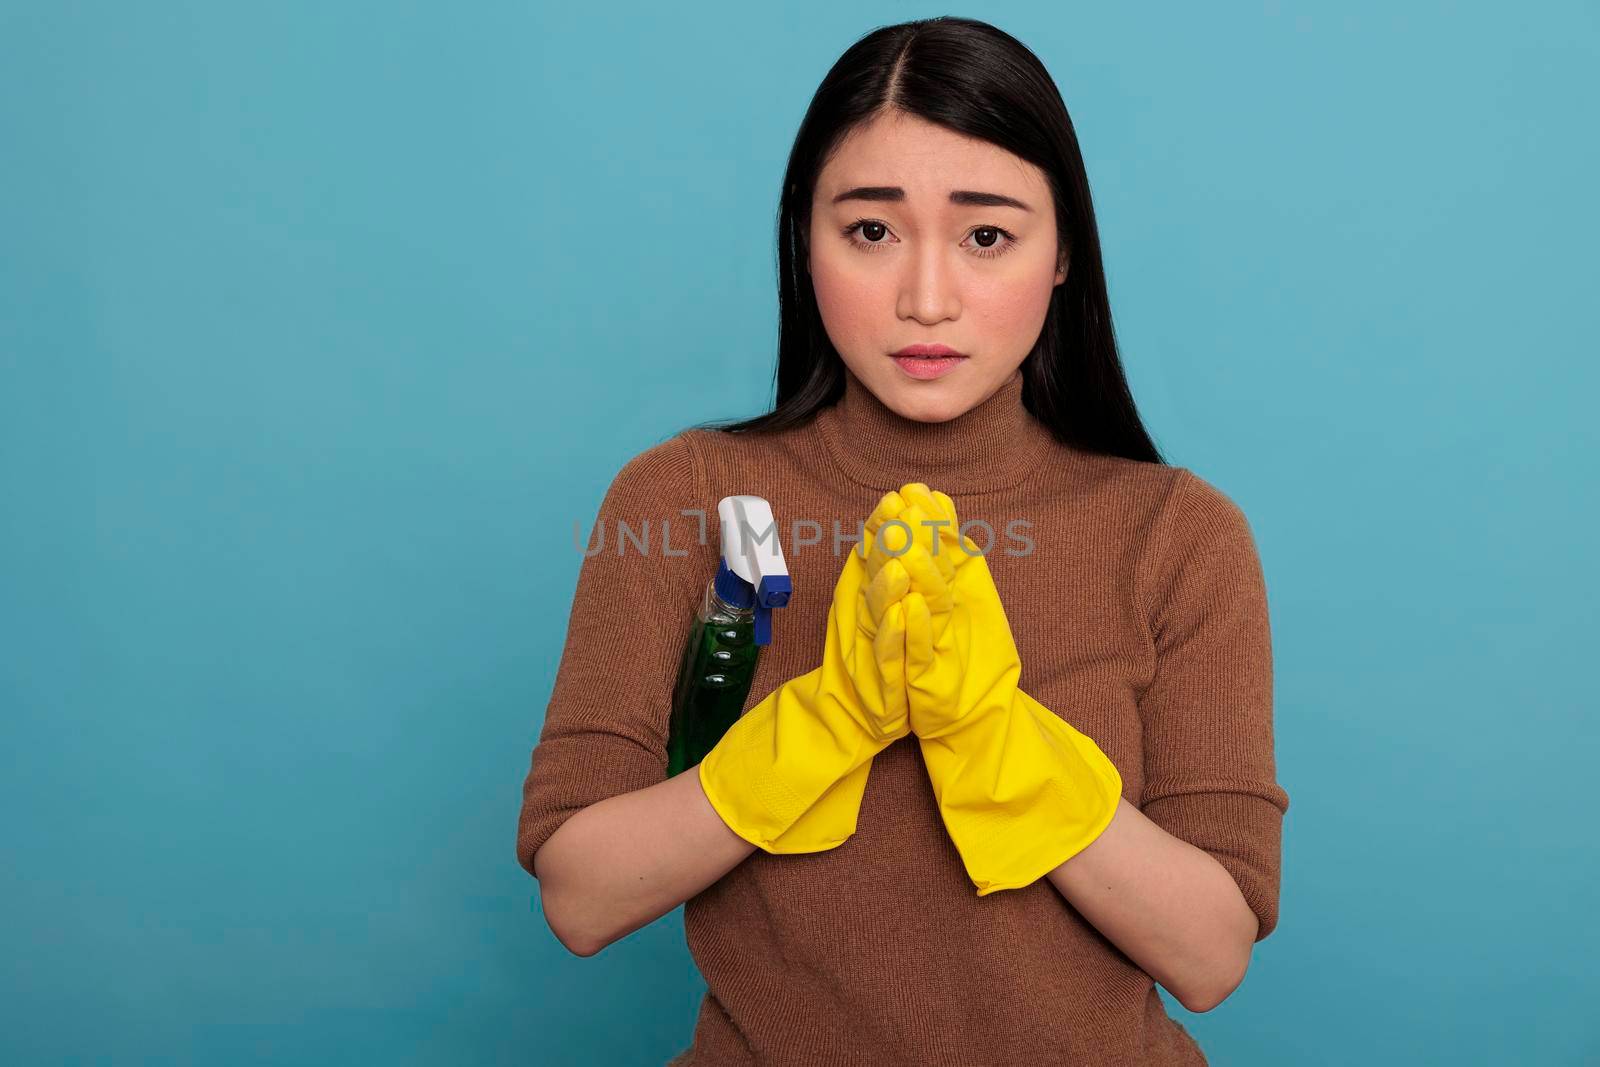 Young frightened scared asian housewife put her hands together wearing yellow gloves and a detergent sprayer under arm isolated against a blue background, Housewife worker, Cleaning home concept,